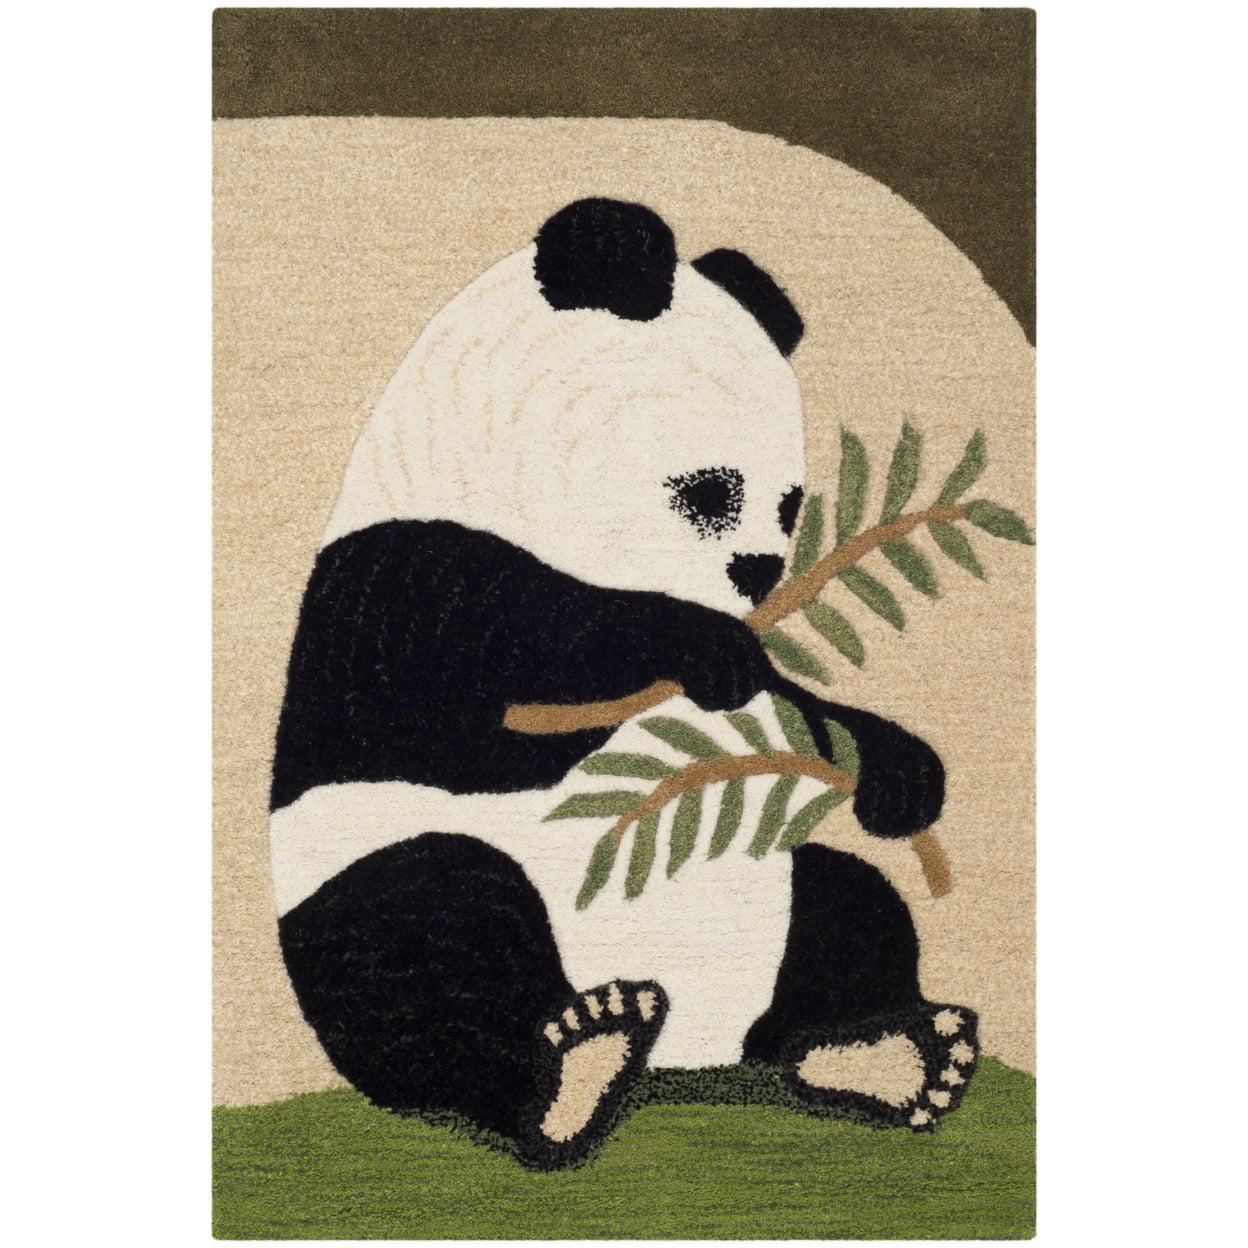 Cute Panda Coloring Books for Kids Ages Graphic by Laxuri Art